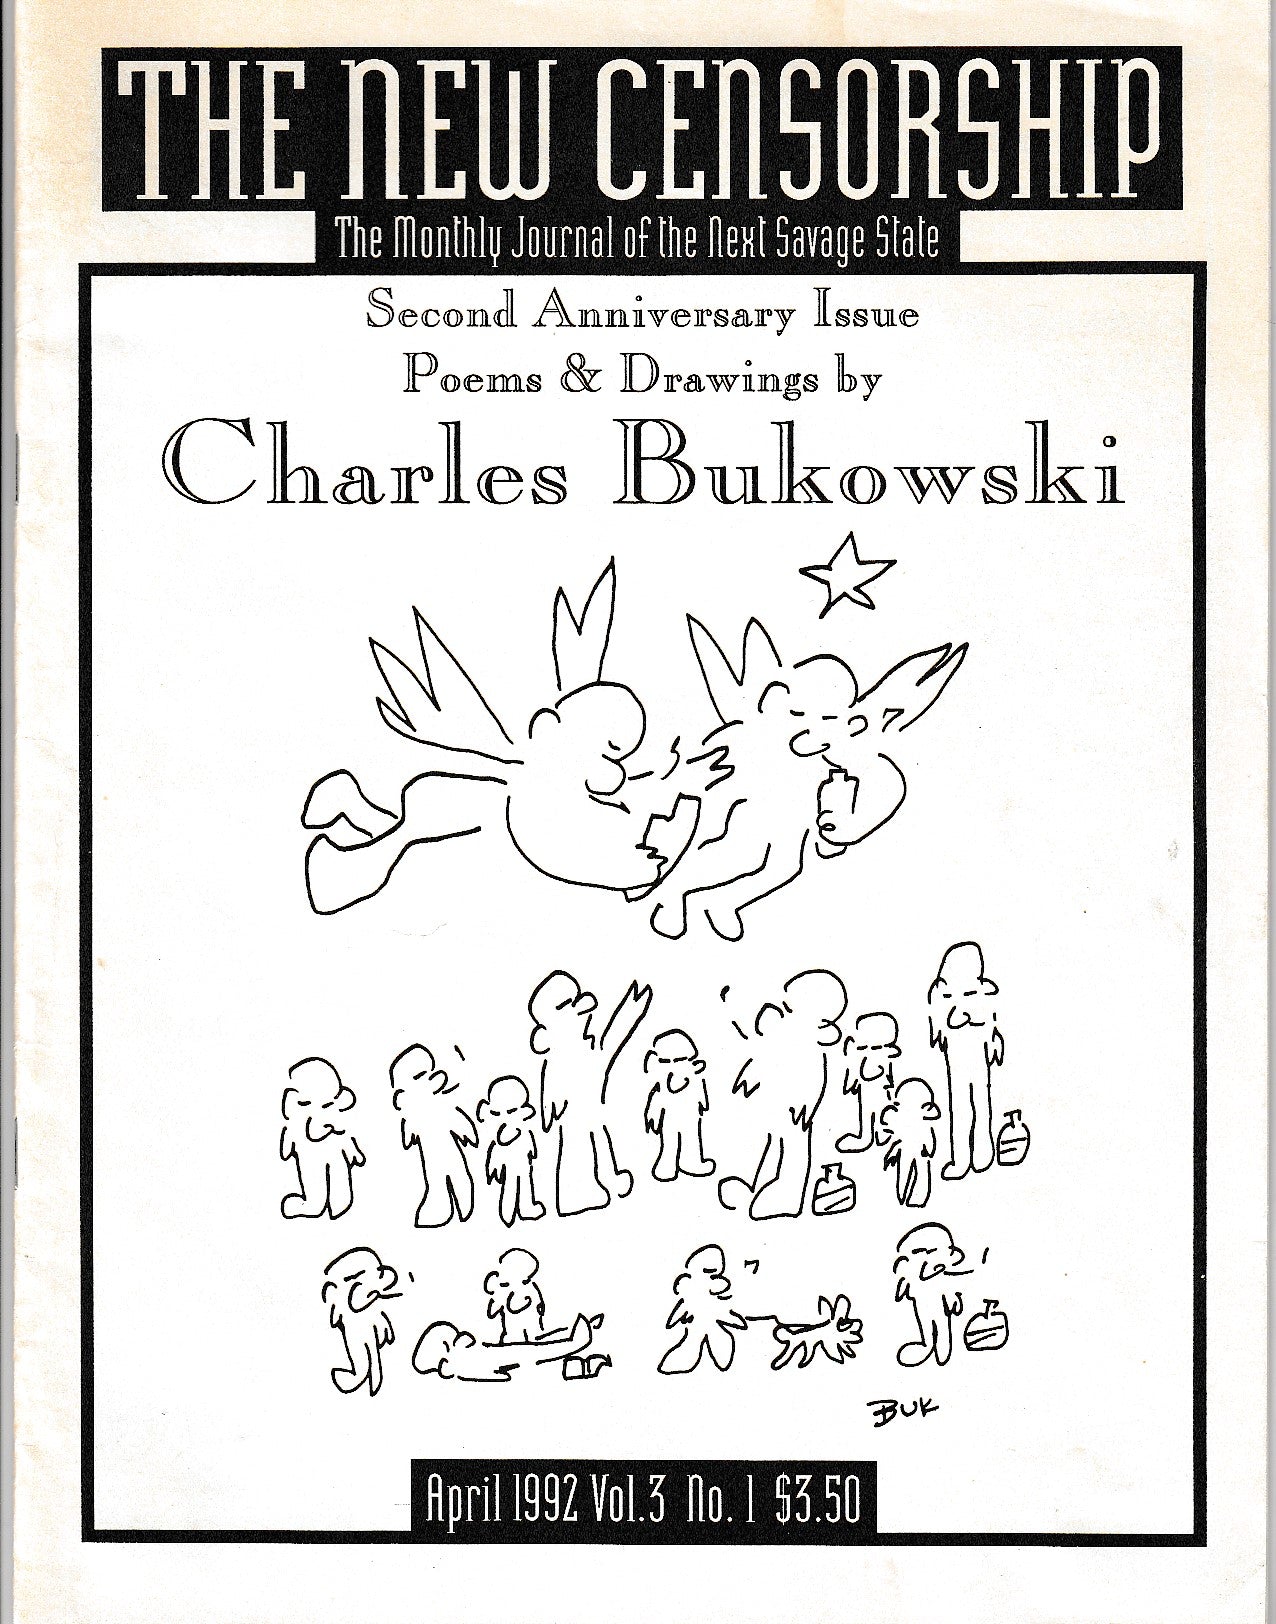 The New Censorship April 1992: Six Uncollected, 11 First Appearance Charles Bukowski Poems (20 Total): Entire Issue Devoted to Drawings & Poems by Charles Bukowski